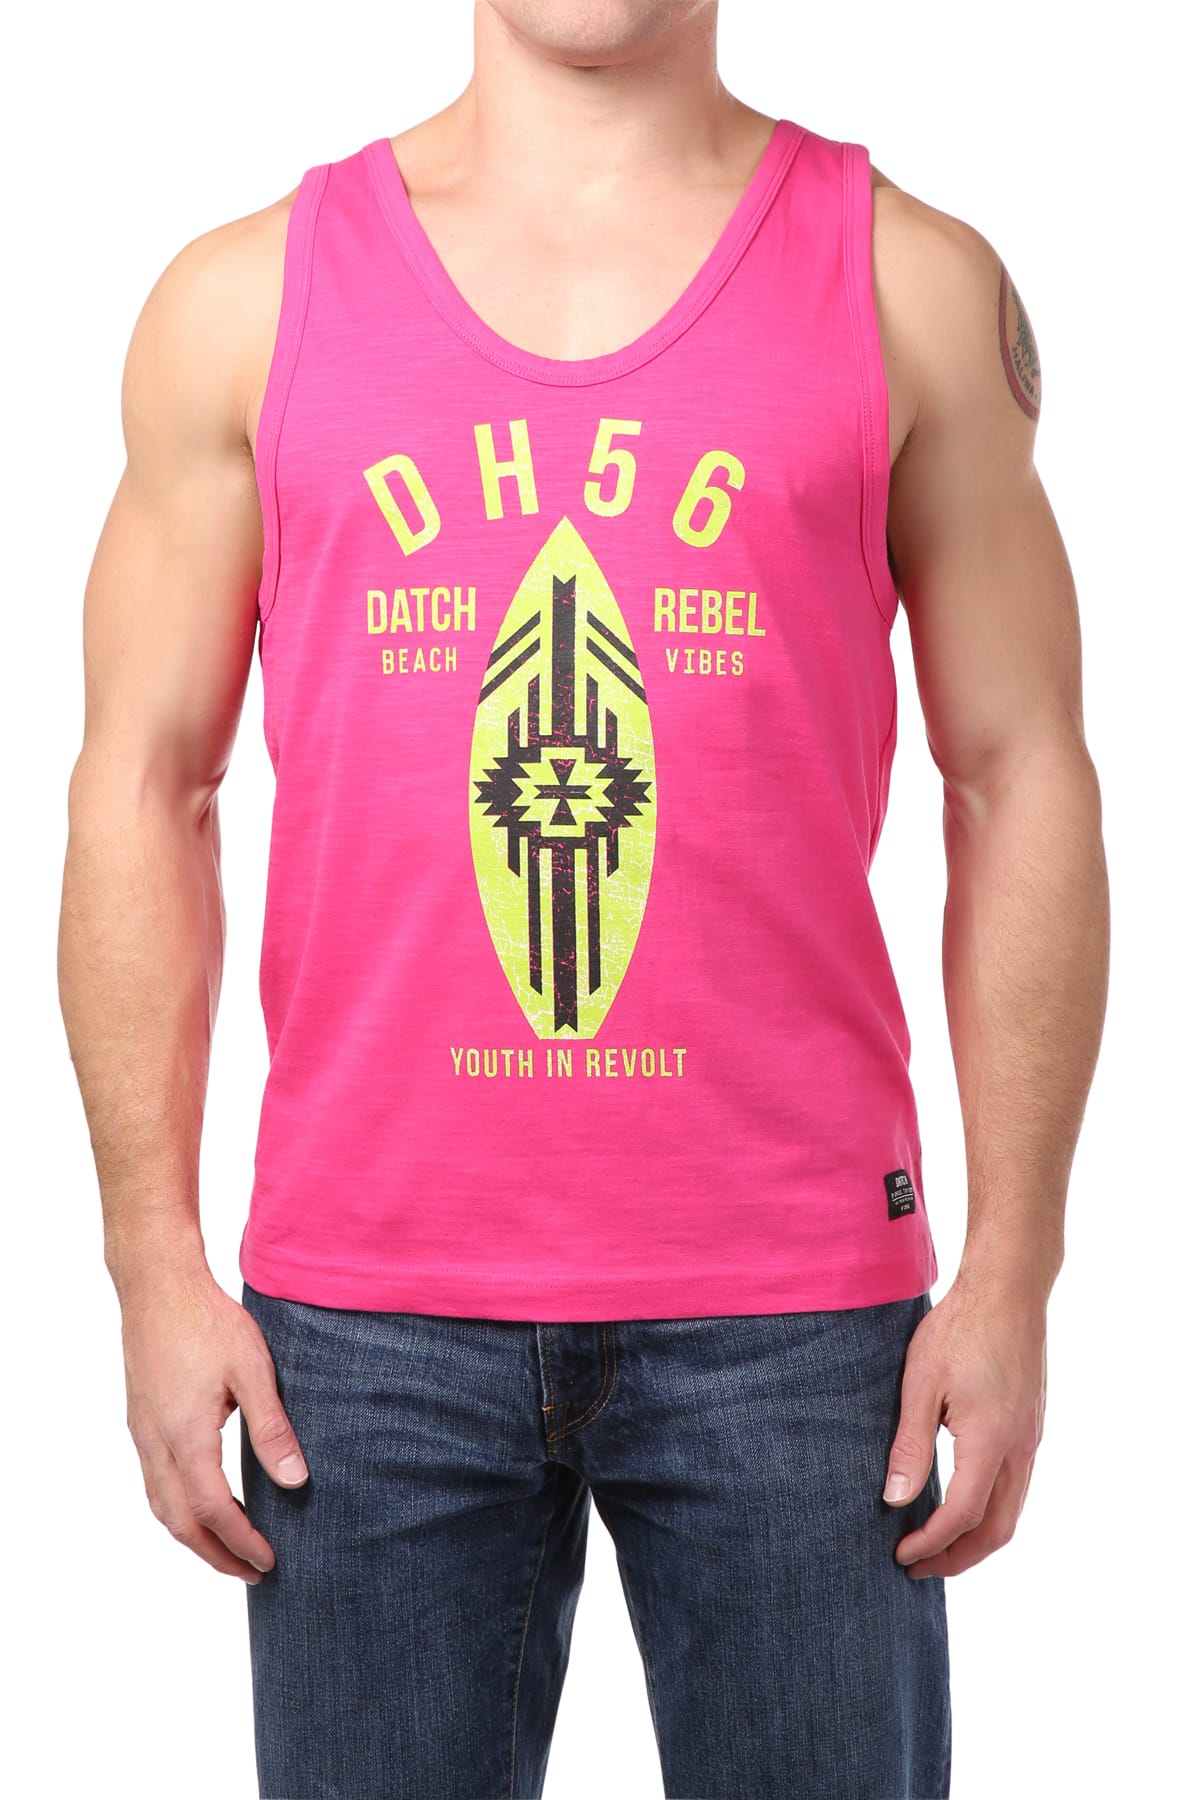 Datch Pink Youth In Revolt Tank Top